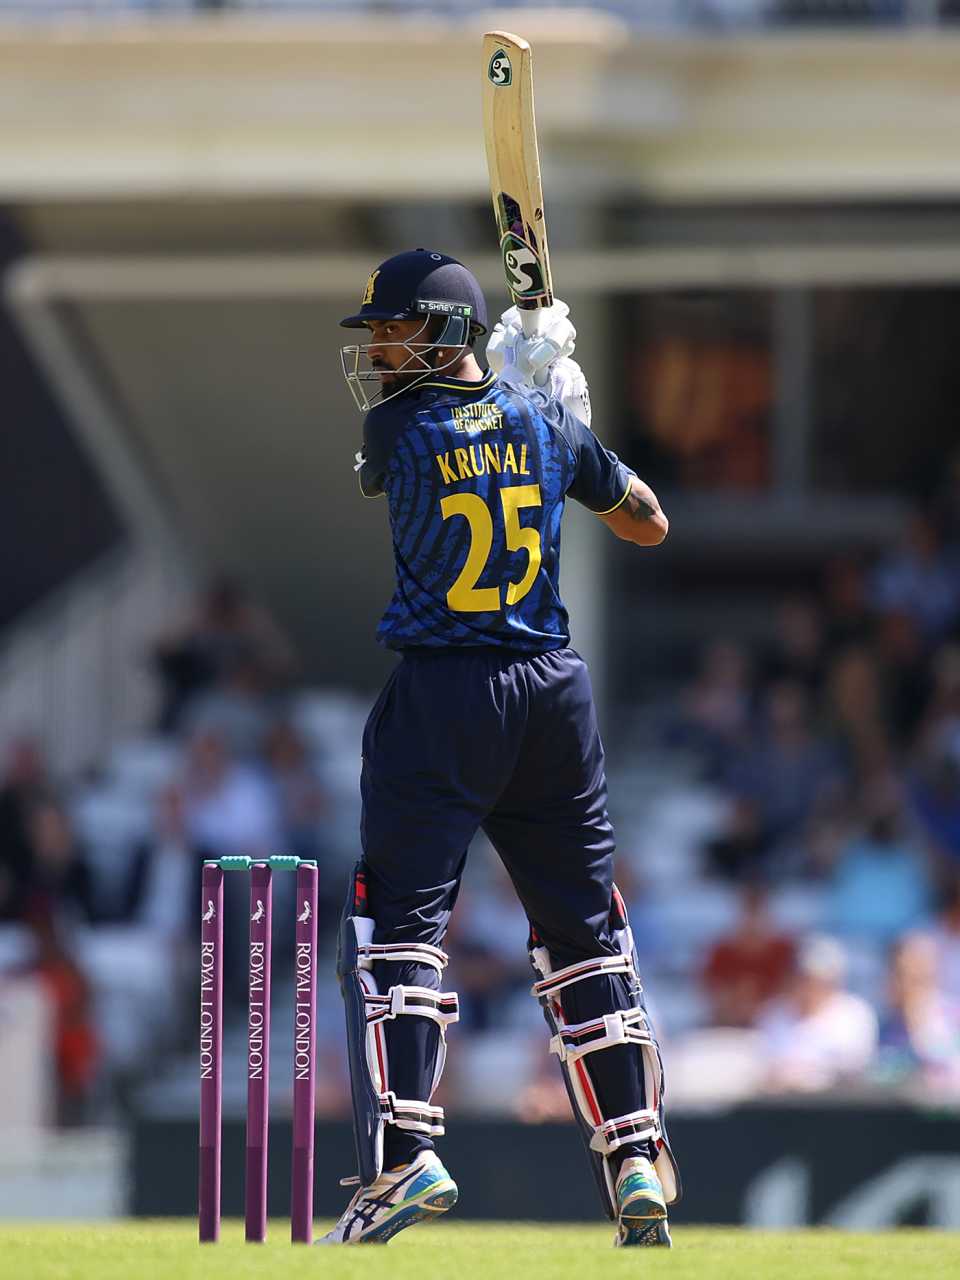 Krunal Pandya flashes through the off side, Surrey vs Warwickshire, Royal London Cup, The Oval, August 7, 2022